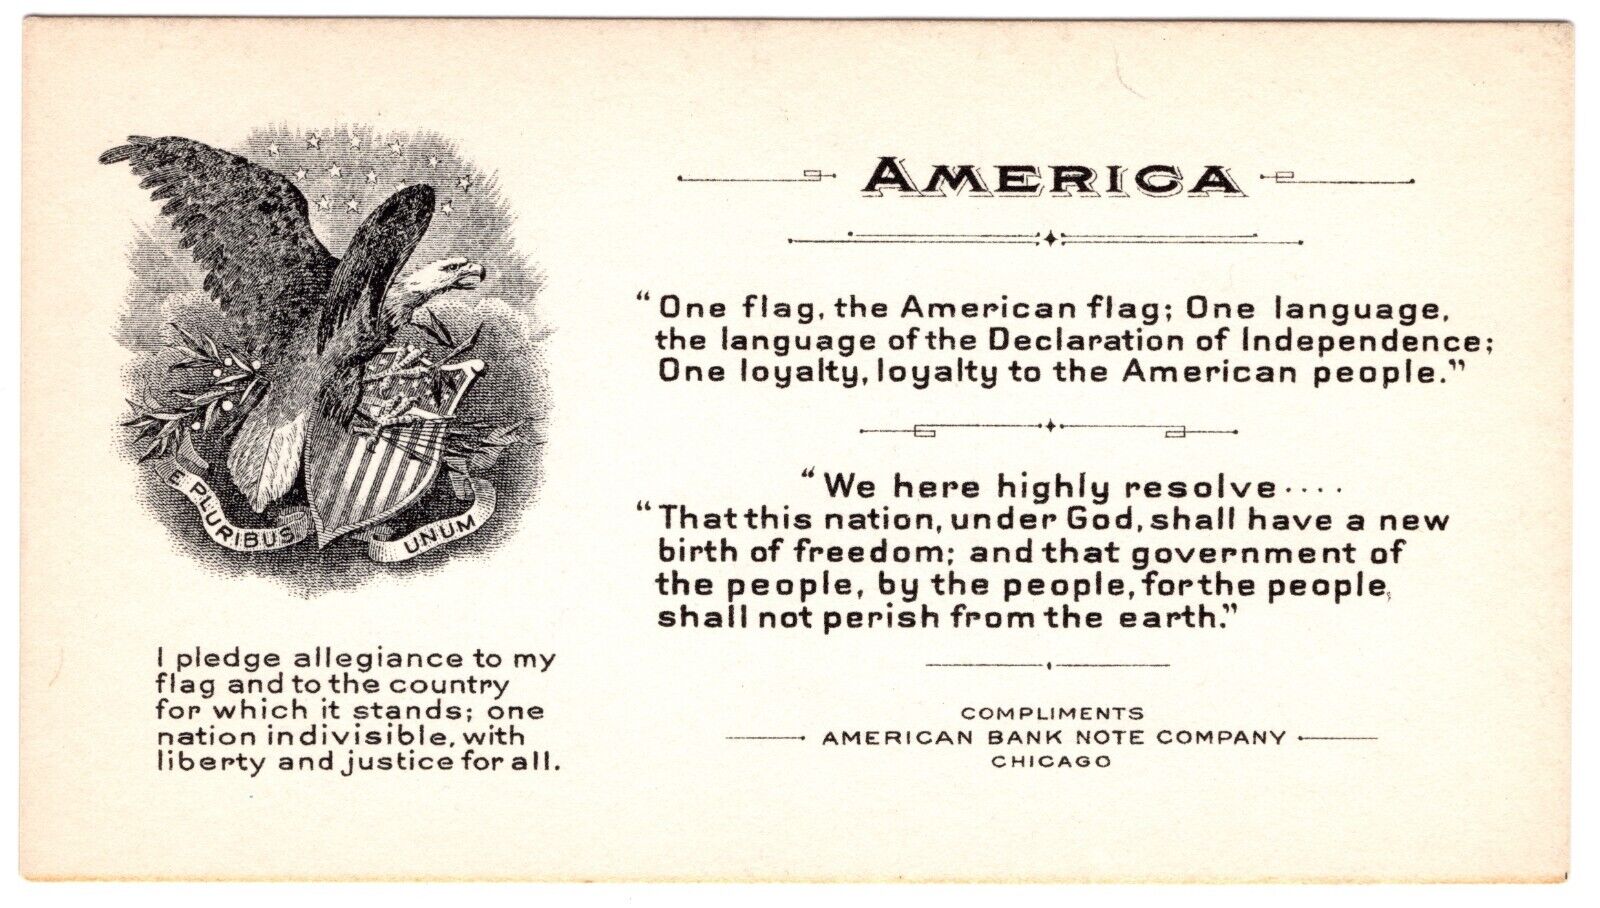 America - Advertising Business Card from American Bank Note Company, 1890-1920